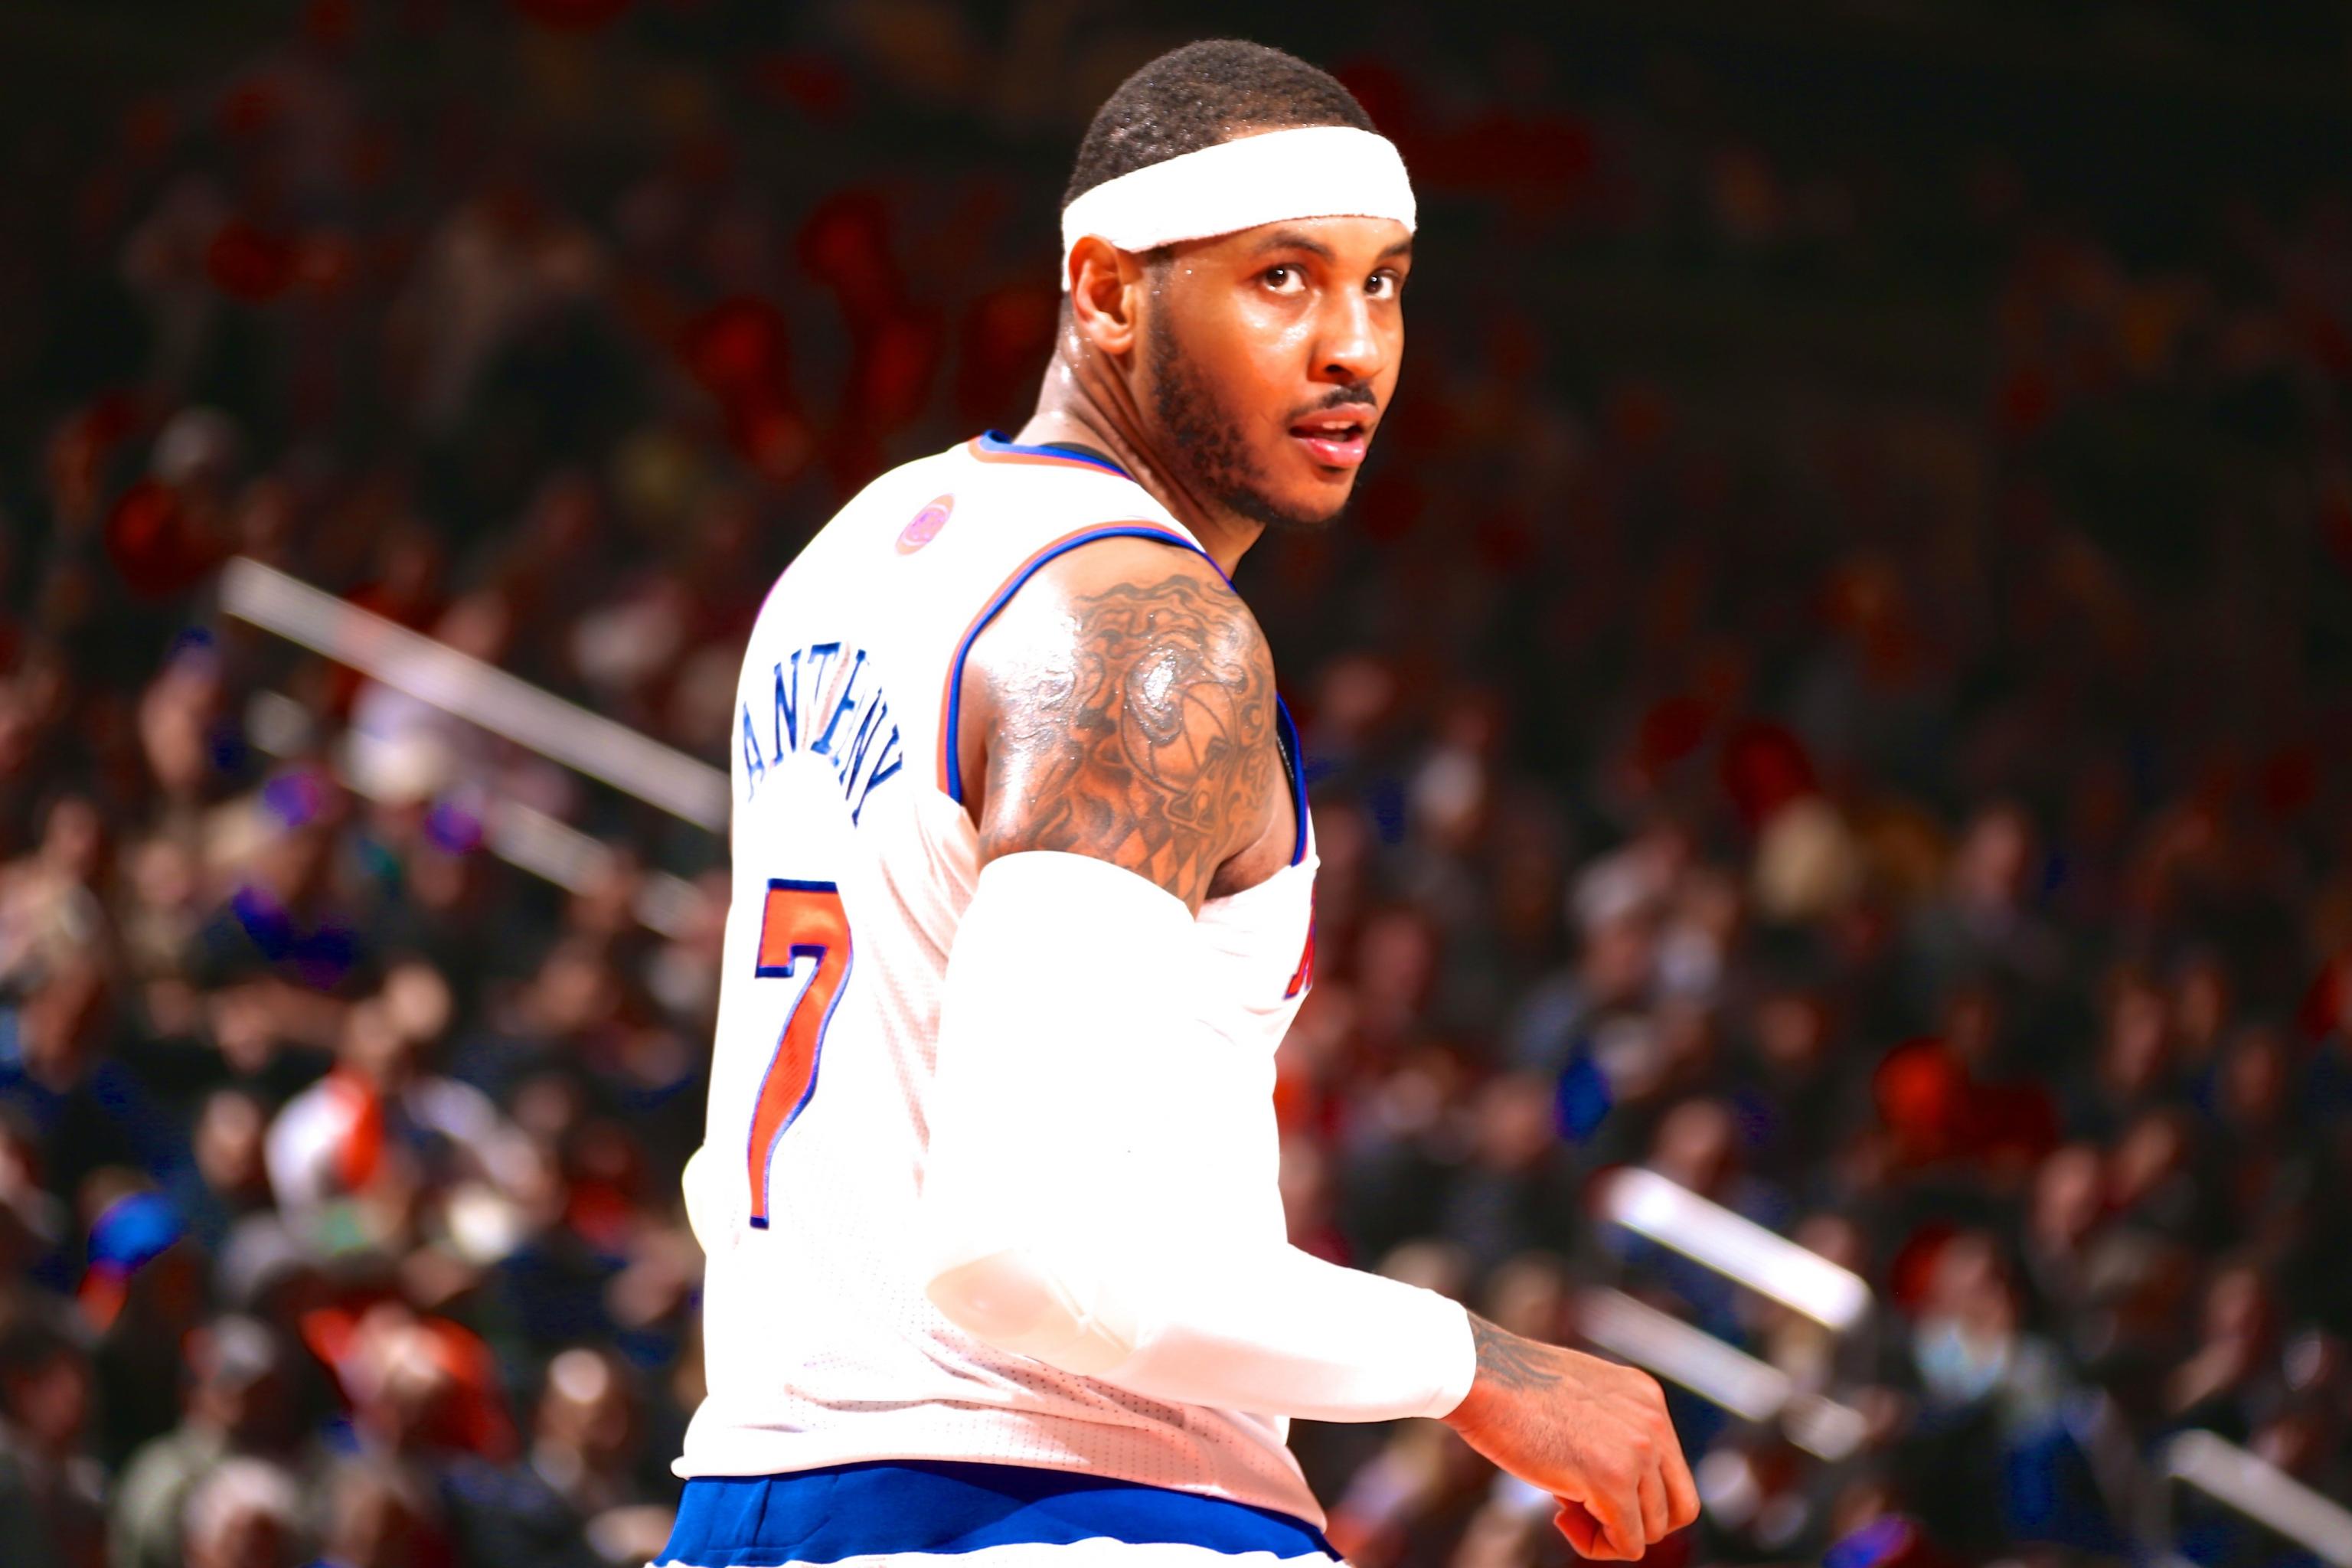 Iman Shumpert Reveals Why He Respects Carmelo Anthony So Much